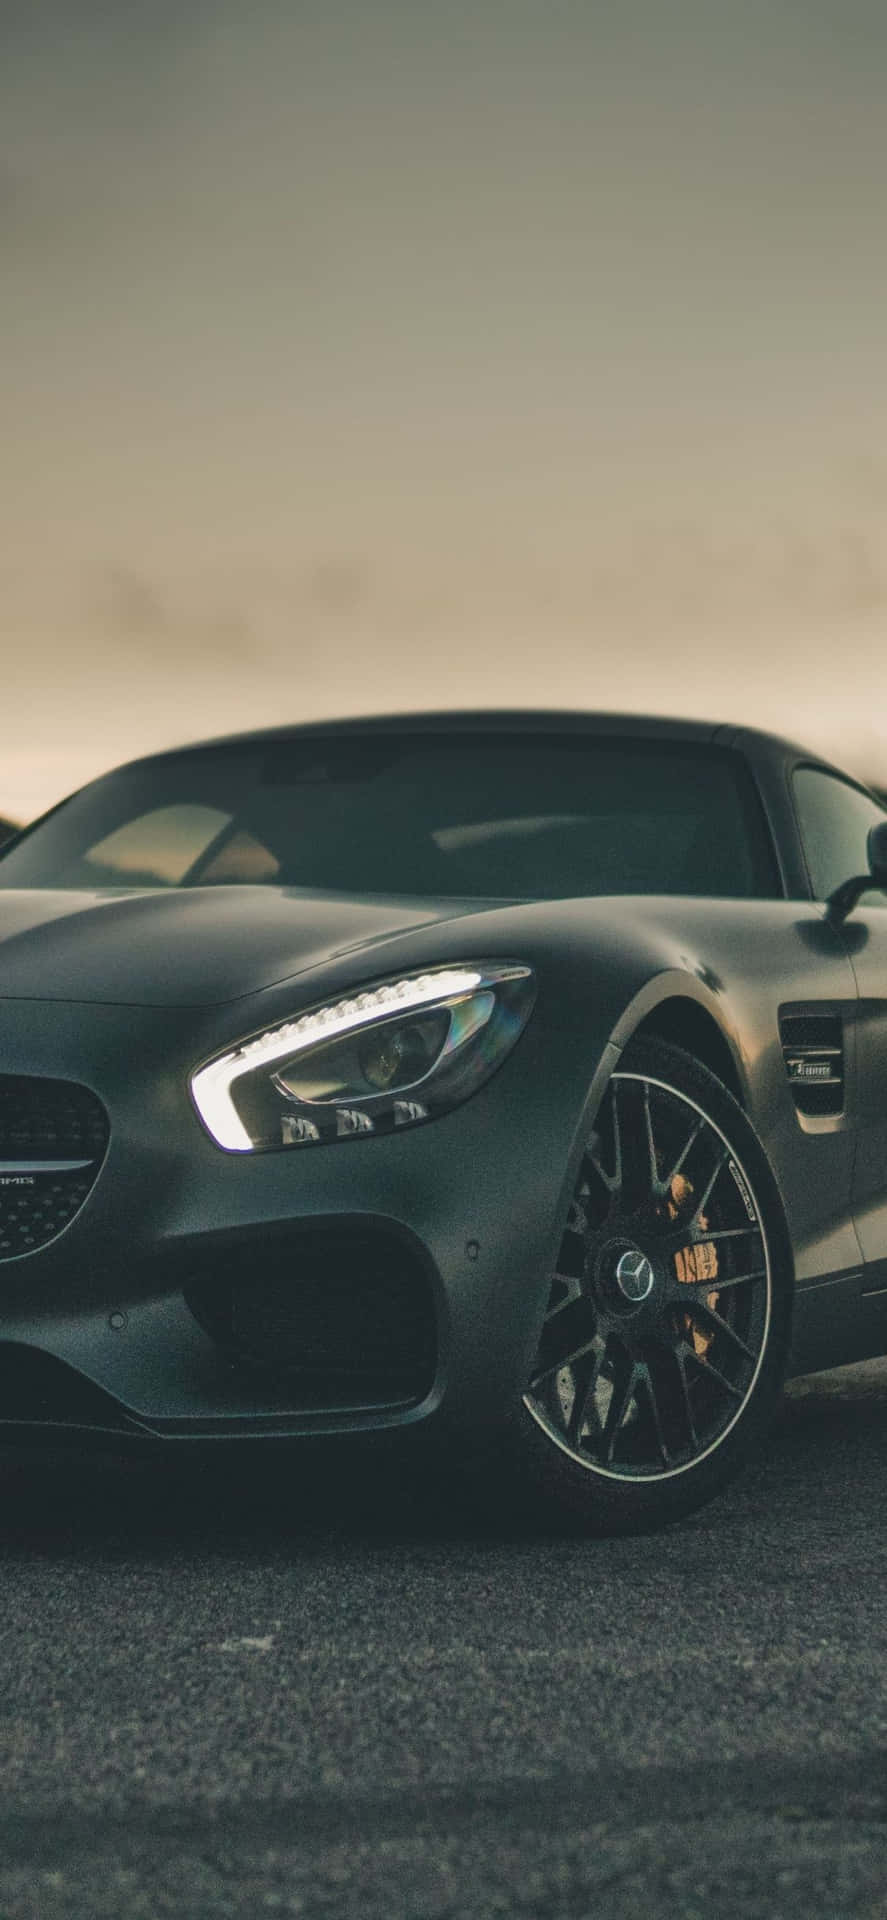 Iphone Xs Mercedes Background Side View Of A Amg Gt Background